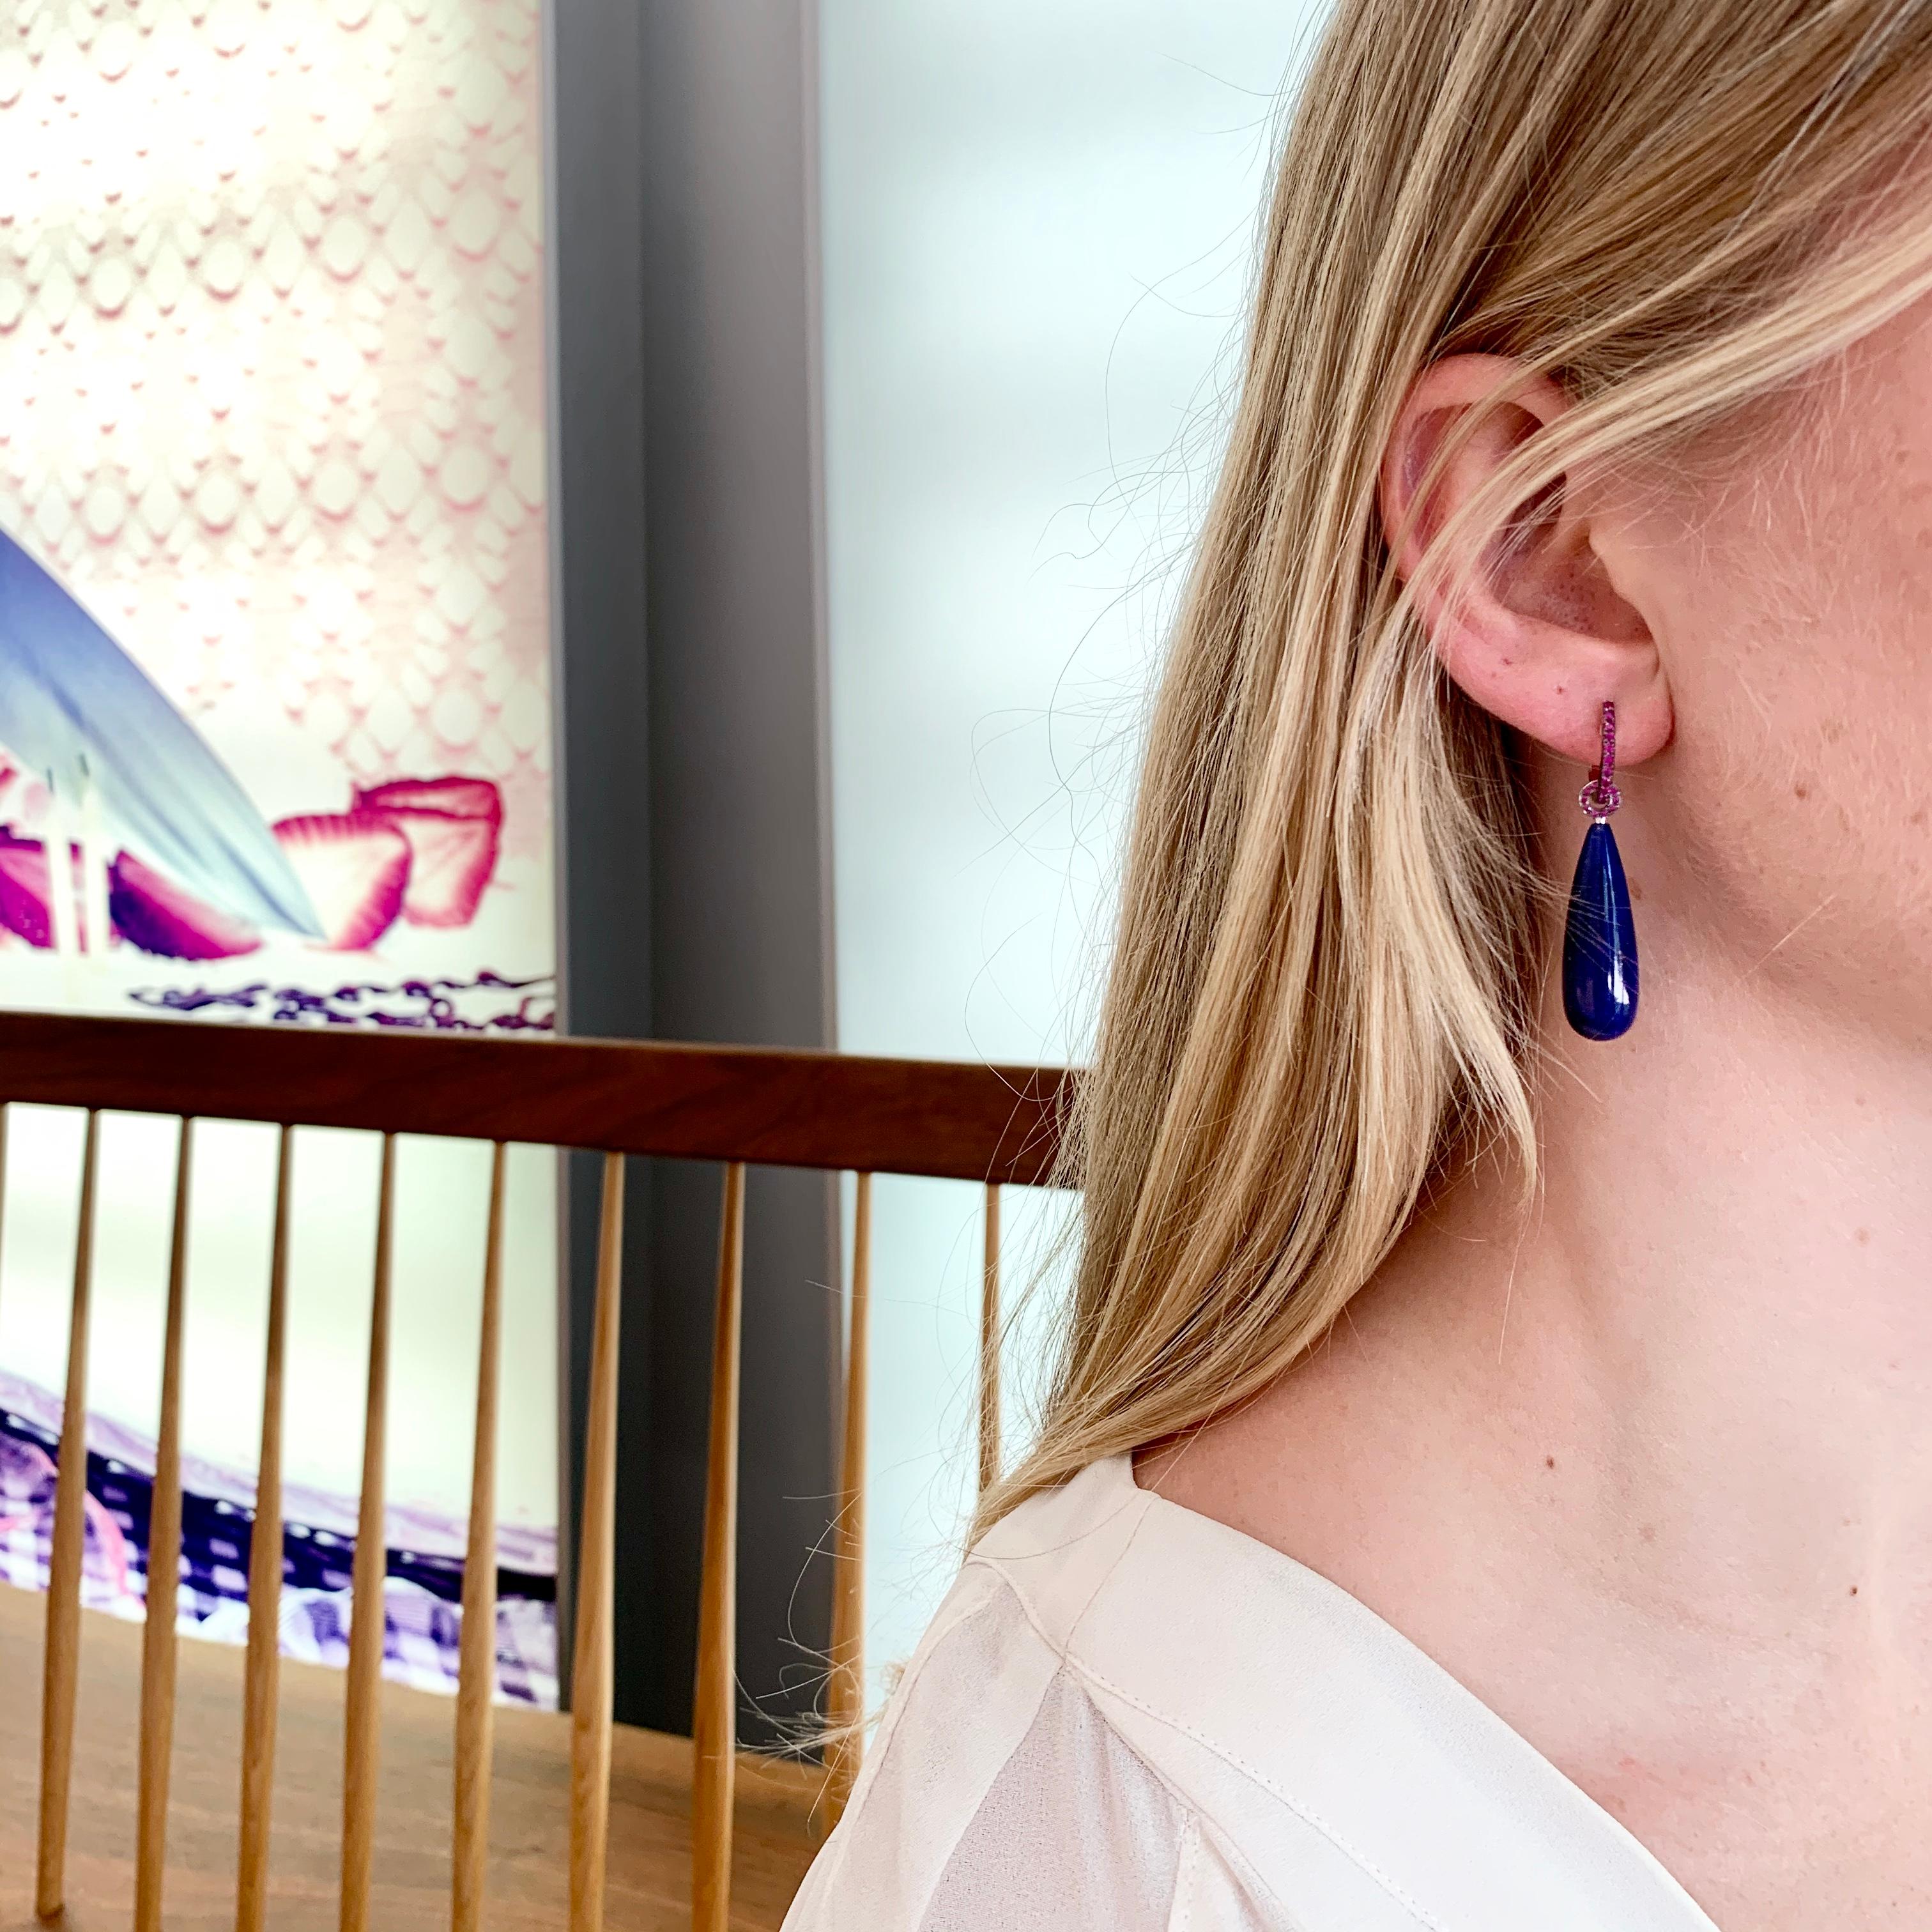 The fascination lies in the interplay of colours - lapis lazuli with precious rubies....
A beautiful pair of earrings which can be worn for both, a clean and sharp office look as well as a stunning evening gown or cocktail dress 